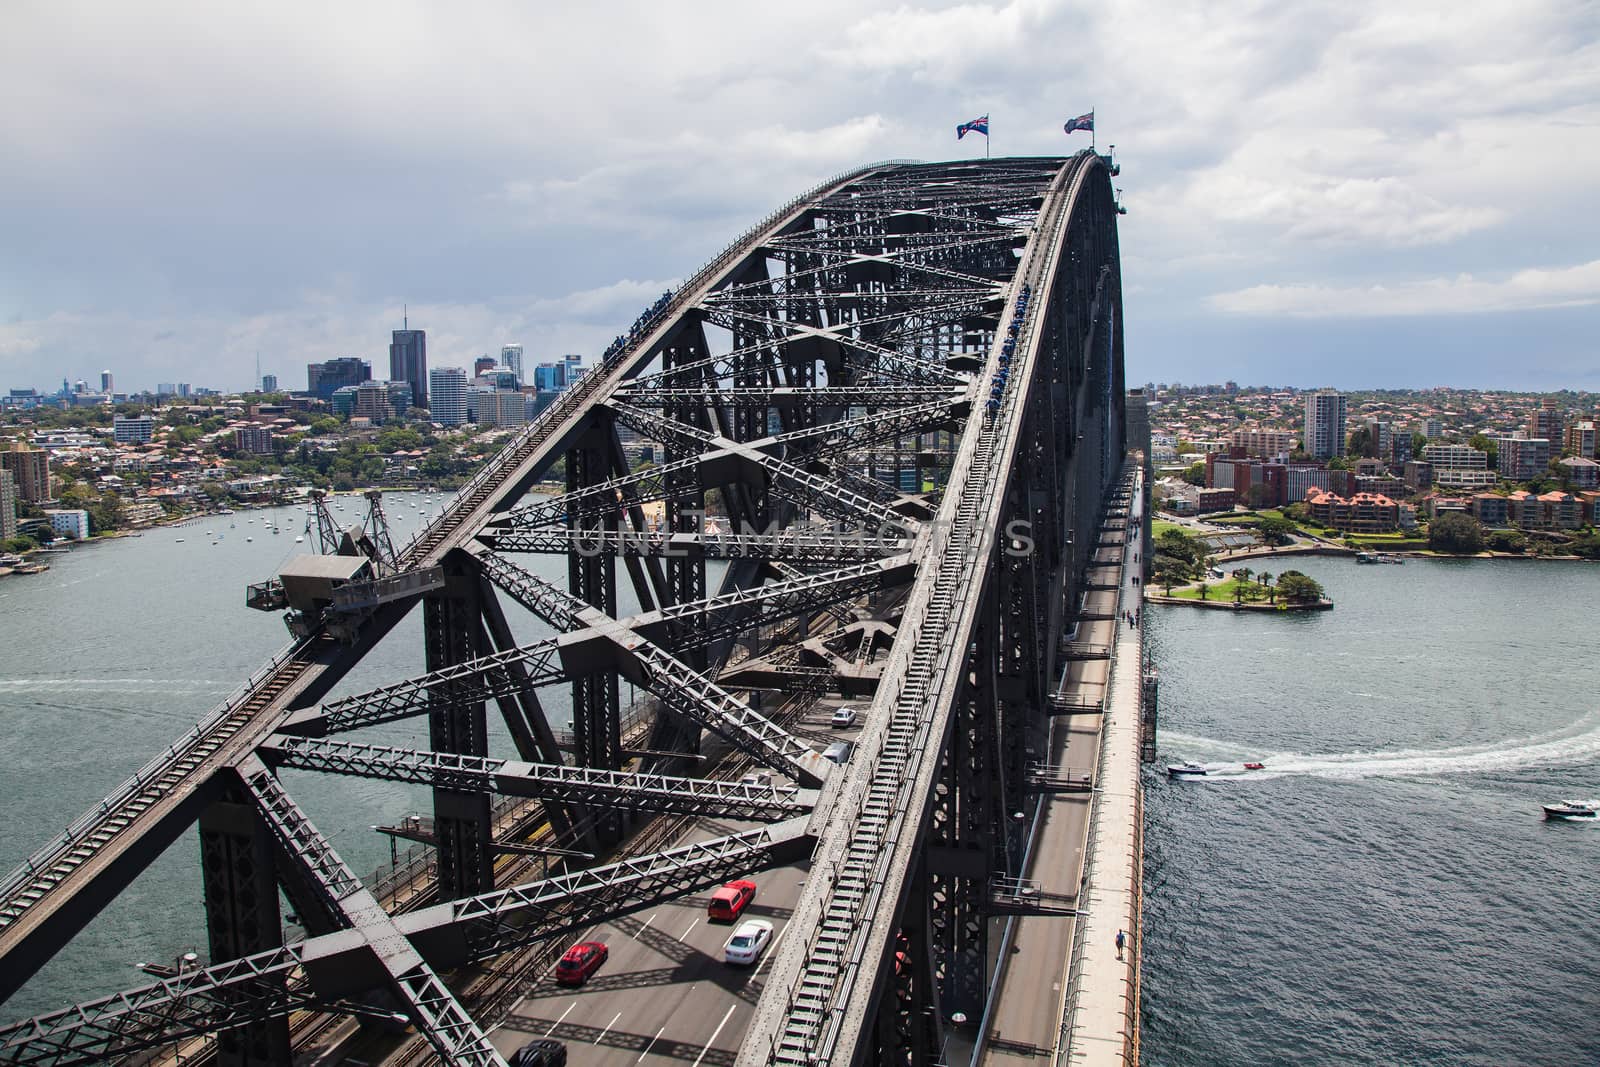 Sydney harbour with bridge structure in foreground. dramatic and unusual view of this landmark taken from one of the bridge pylons give a high angle view looking down the length of the bridgeHigh quality photo